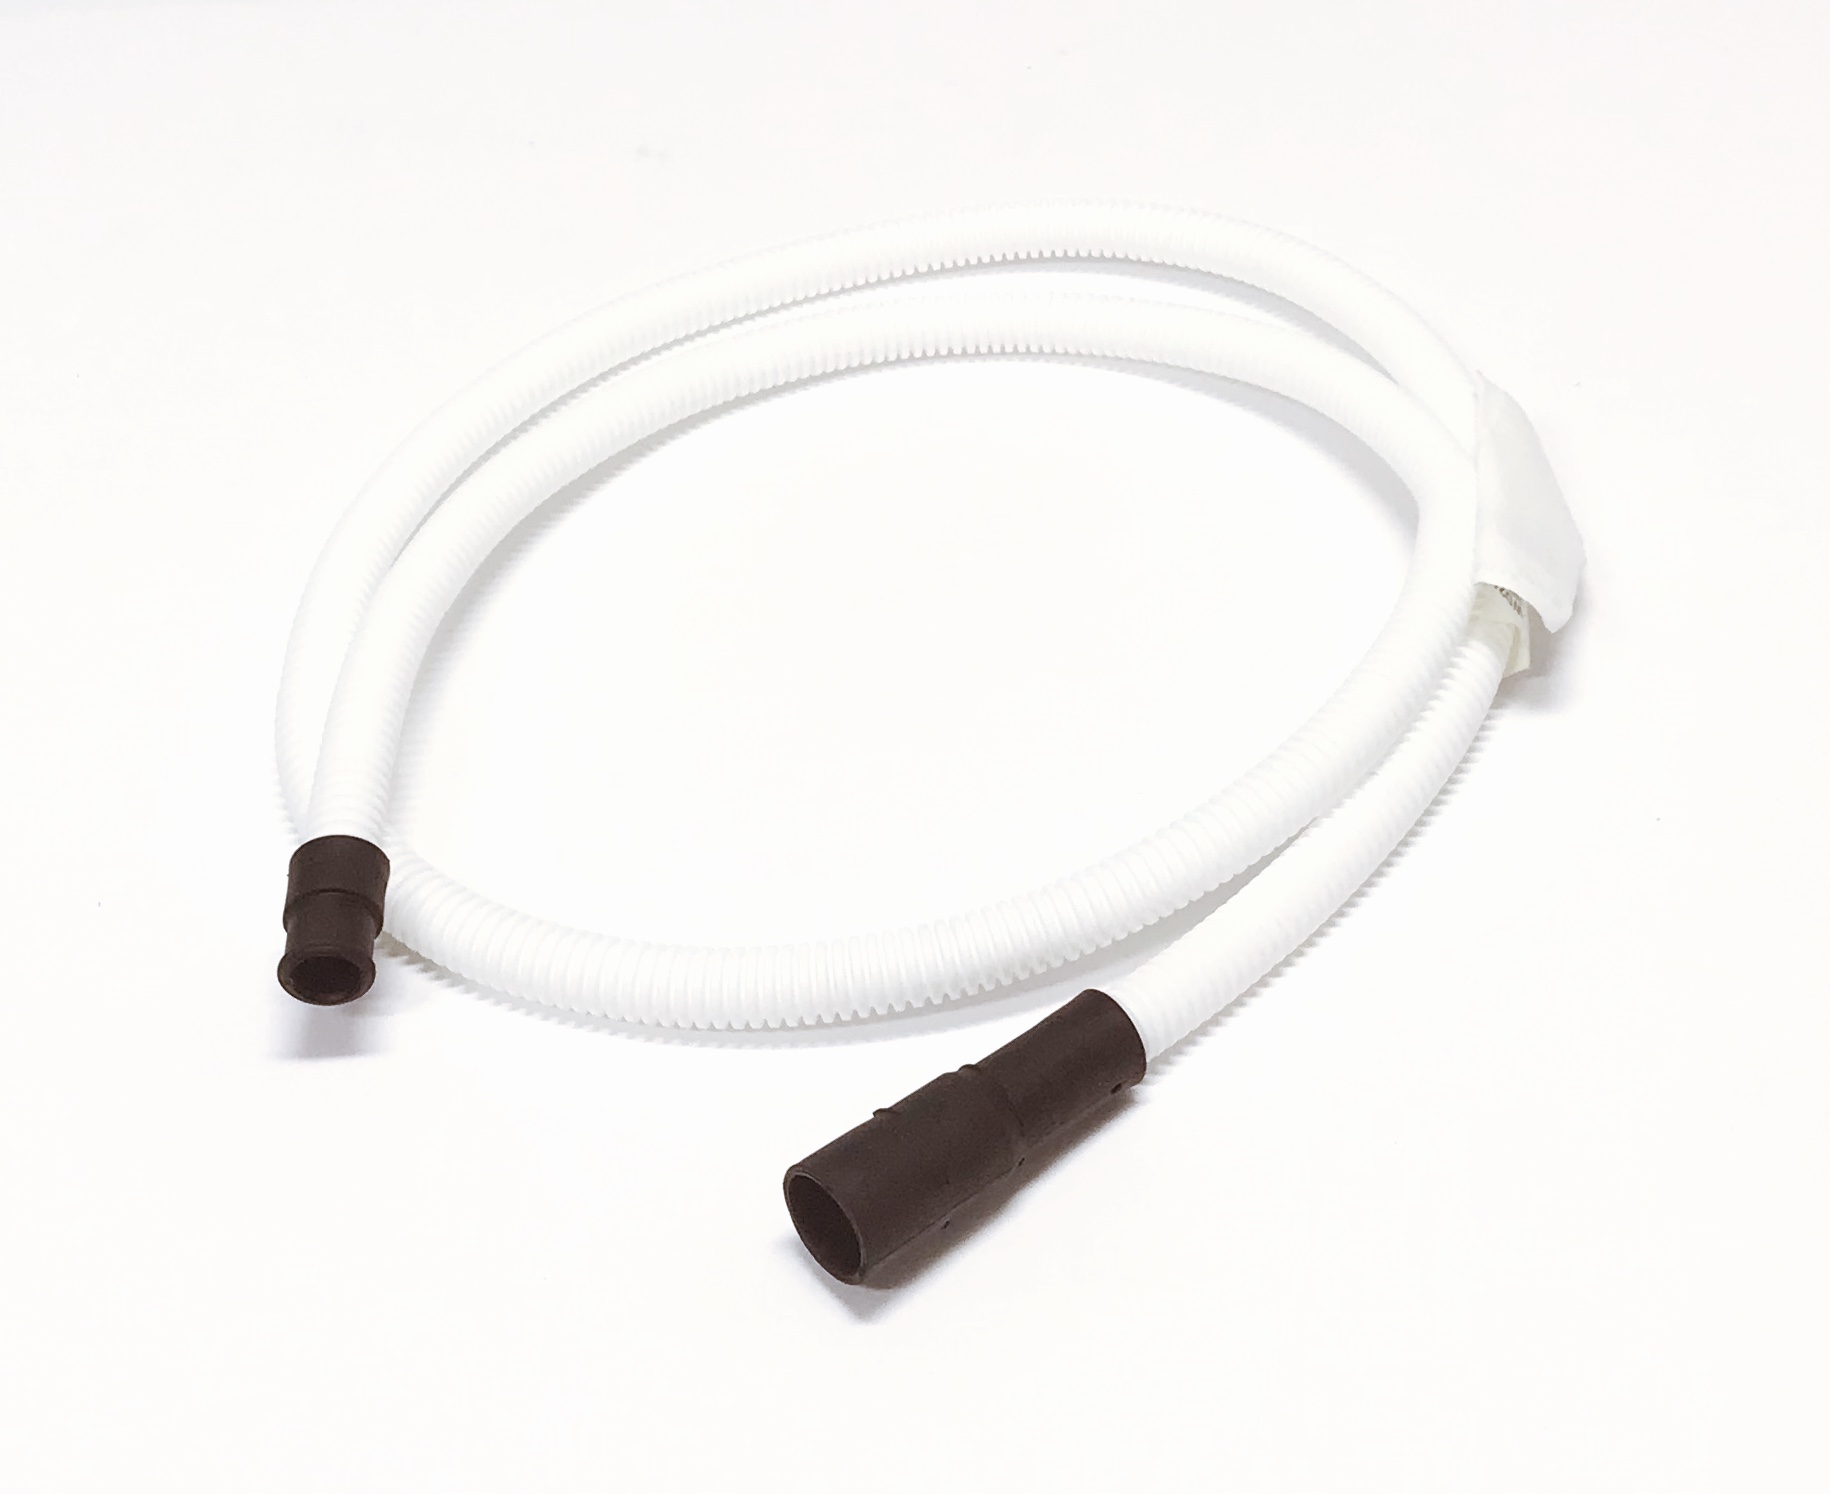 GE OEM GE Dishwasher Drain Hose Originally Shipped With GSM2110D01AA, GSM2110D02AA, GSM2110F00AA, GSM2130D00WW